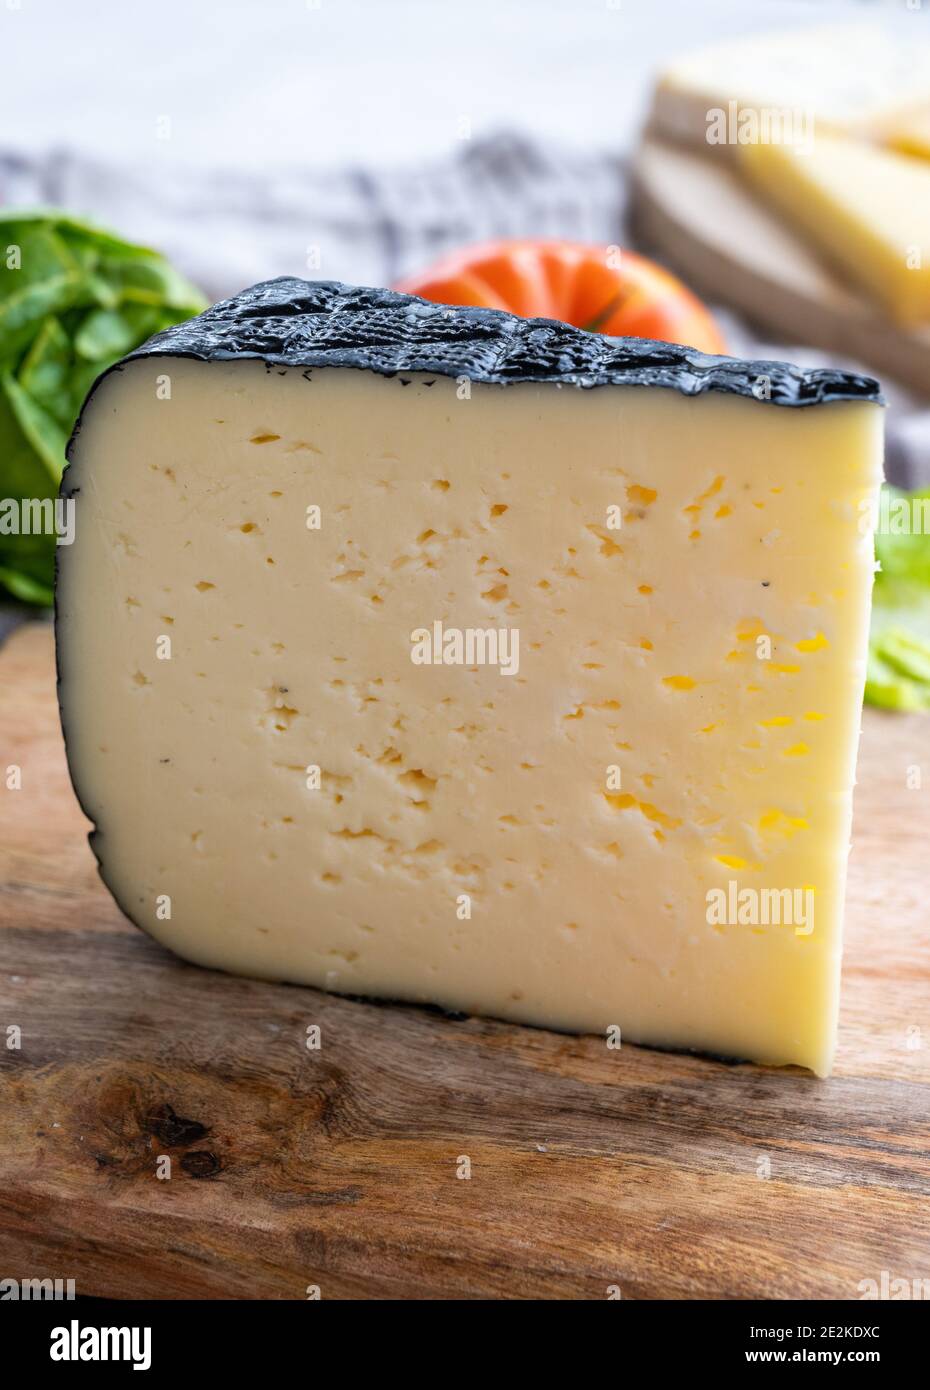 Cheese collection, French fol epi cheese with many little holes, etorki,  tomme noire des pyrenees and ossau iraty cheeses close up Stock Photo -  Alamy